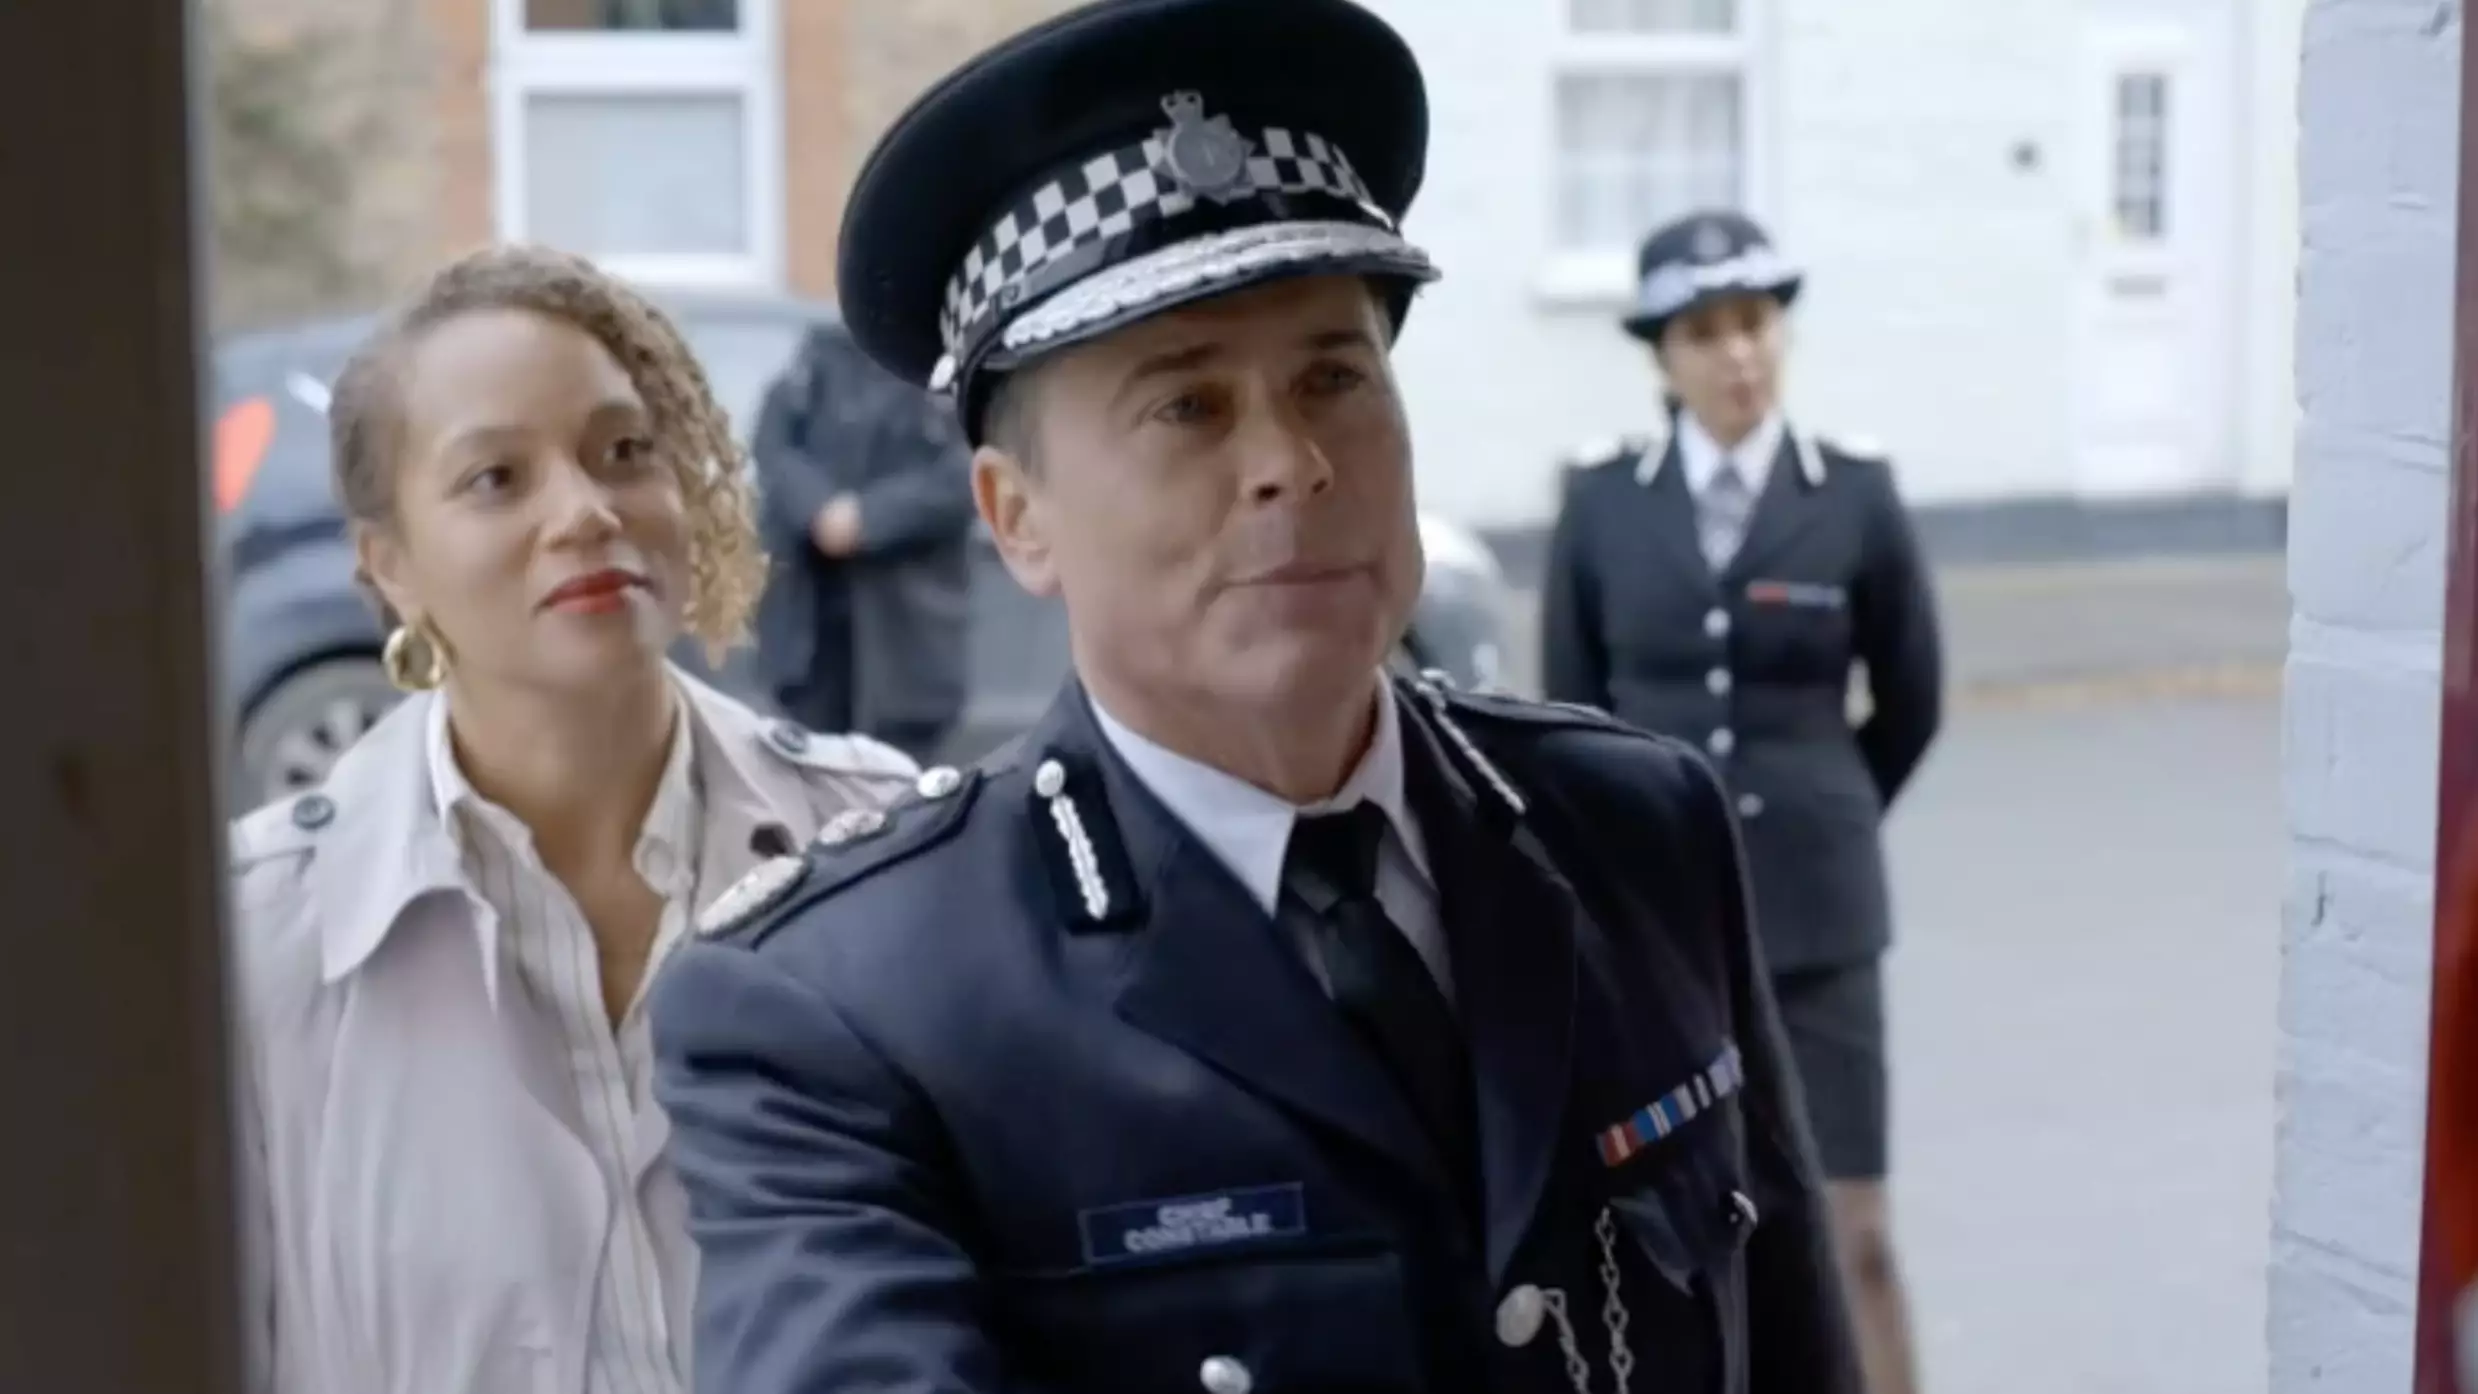 ITV Releases ‘Wild Bill’ Trailer - Its New Police Drama Tipped To Be The Next 'Luther’